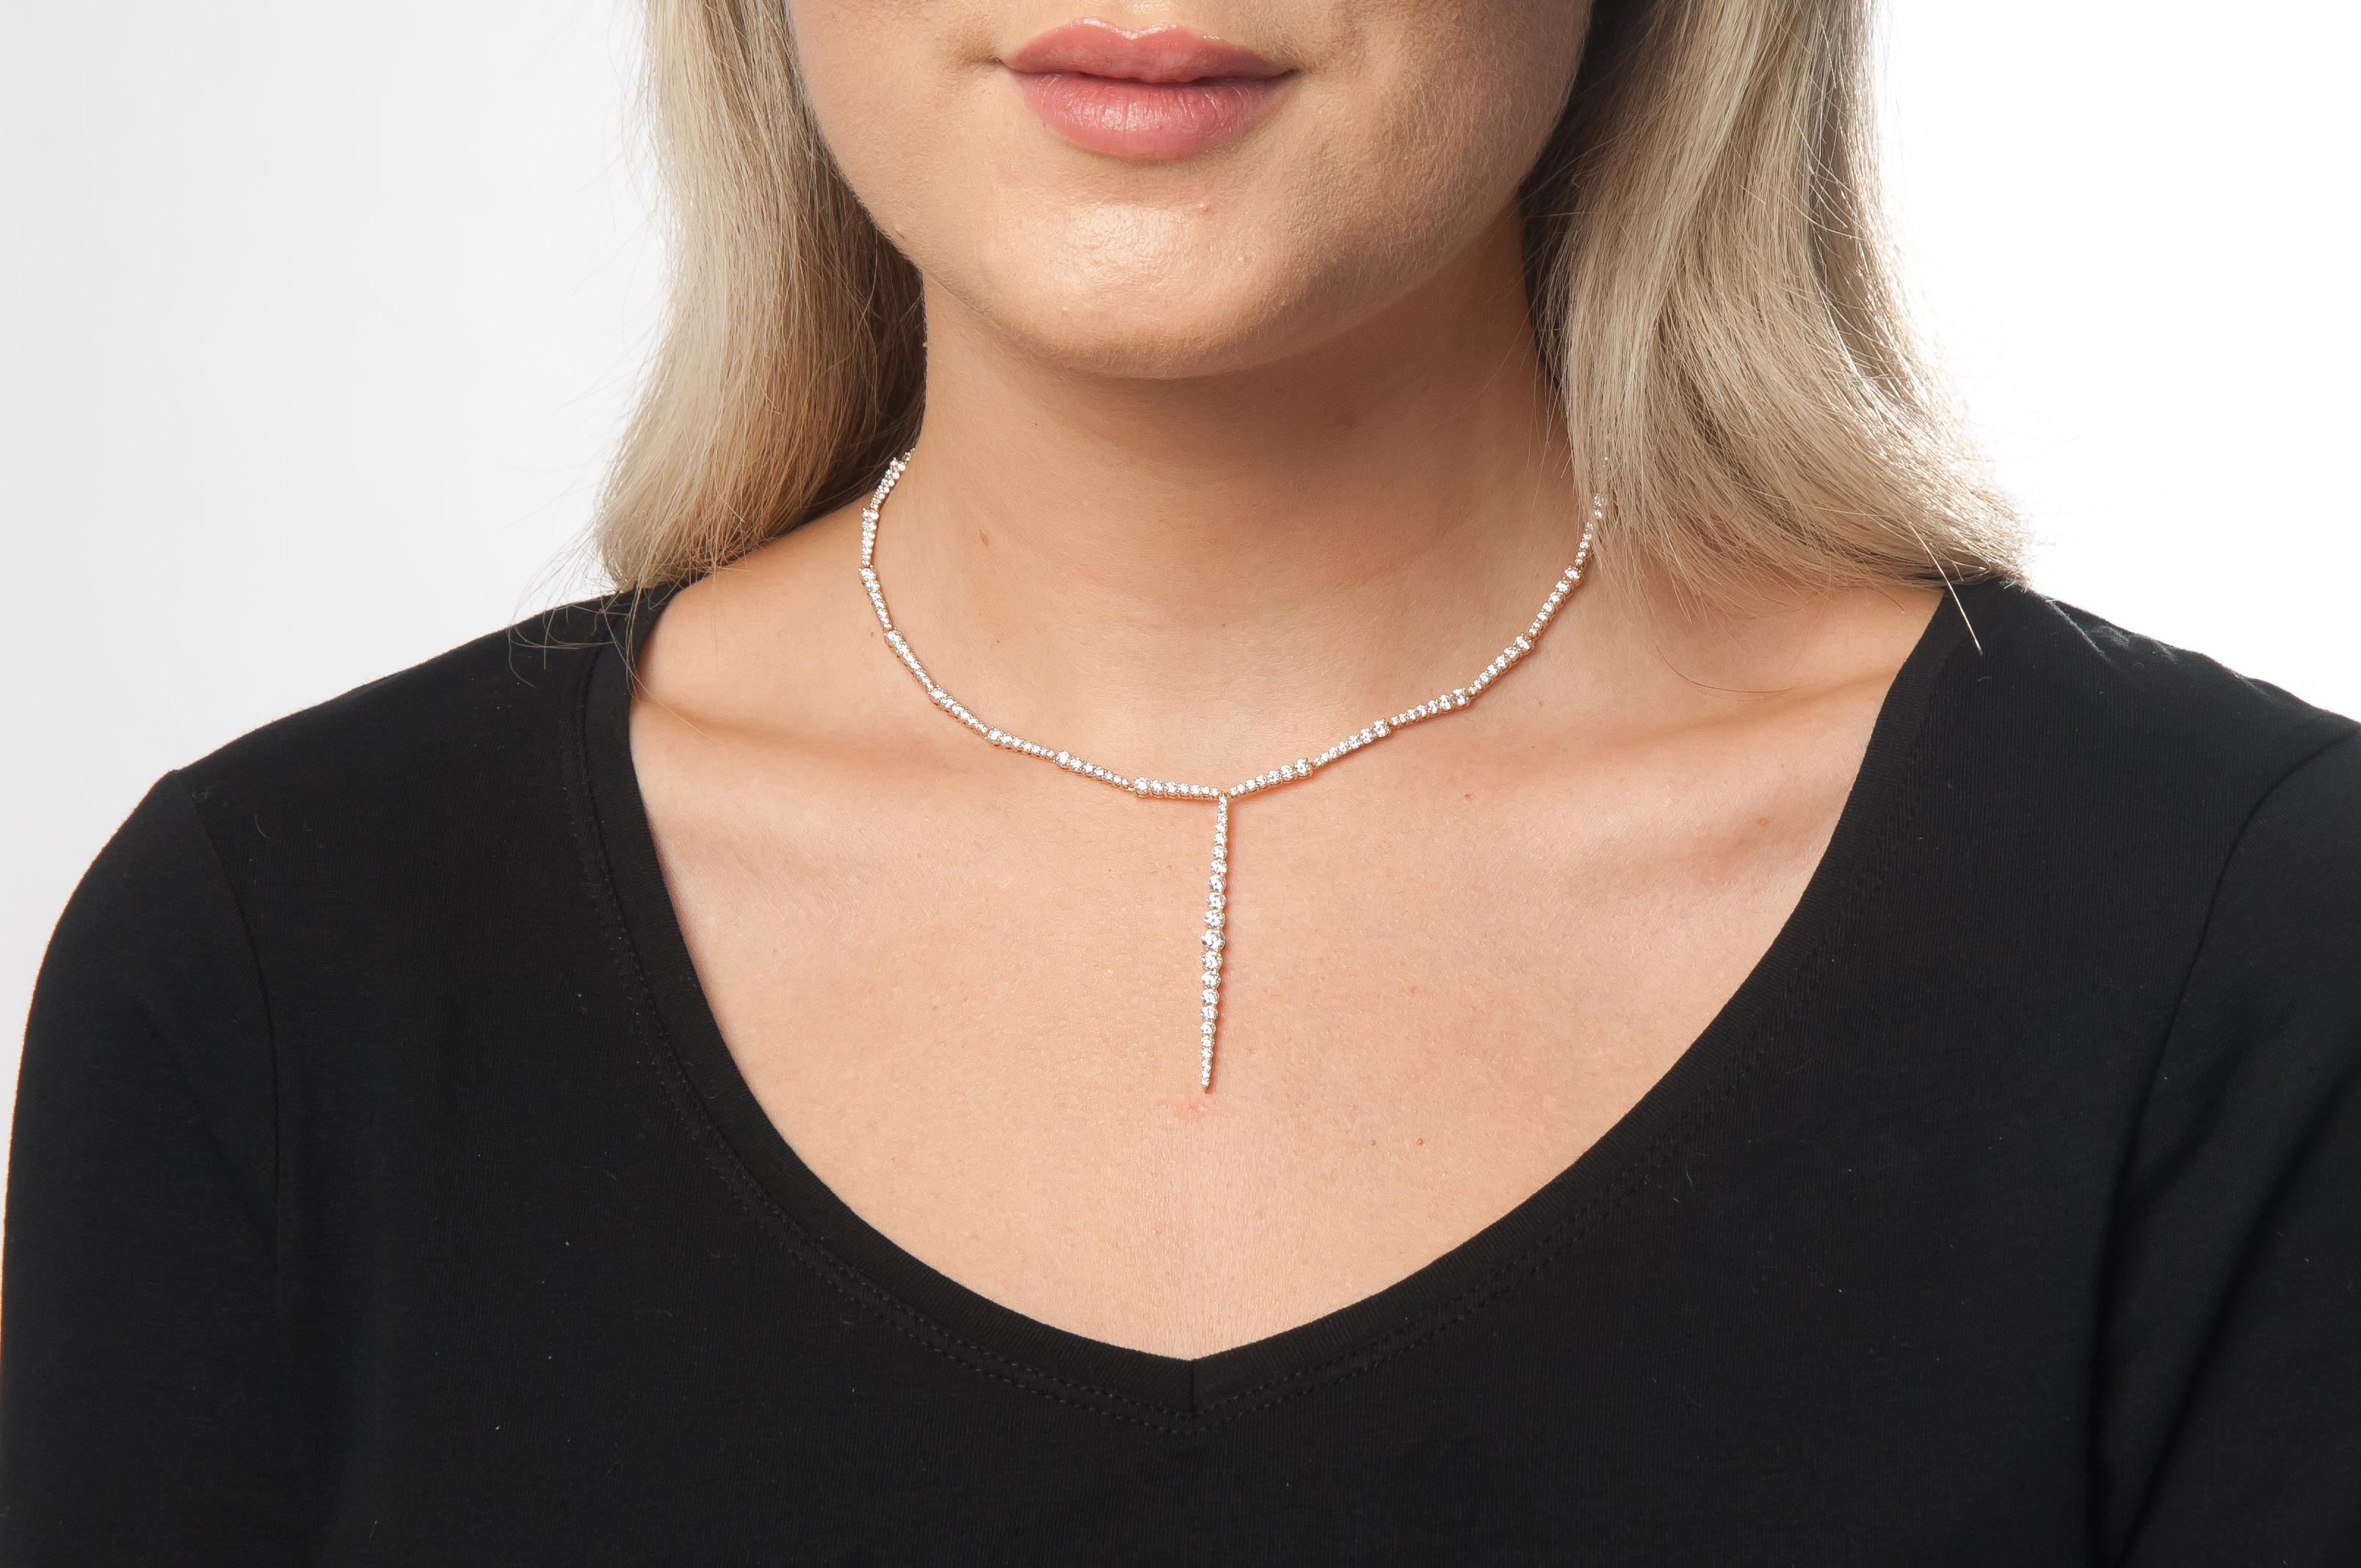 The Stiletto necklace is simple in design, but rich in detail. A modified lariat form with diamonds of graduating then tapering sizes that add dimension.

7.97 Total Carat Weight
18K Rose Gold with Diamonds
The necklace is 15.5 inches long
Drop is 2